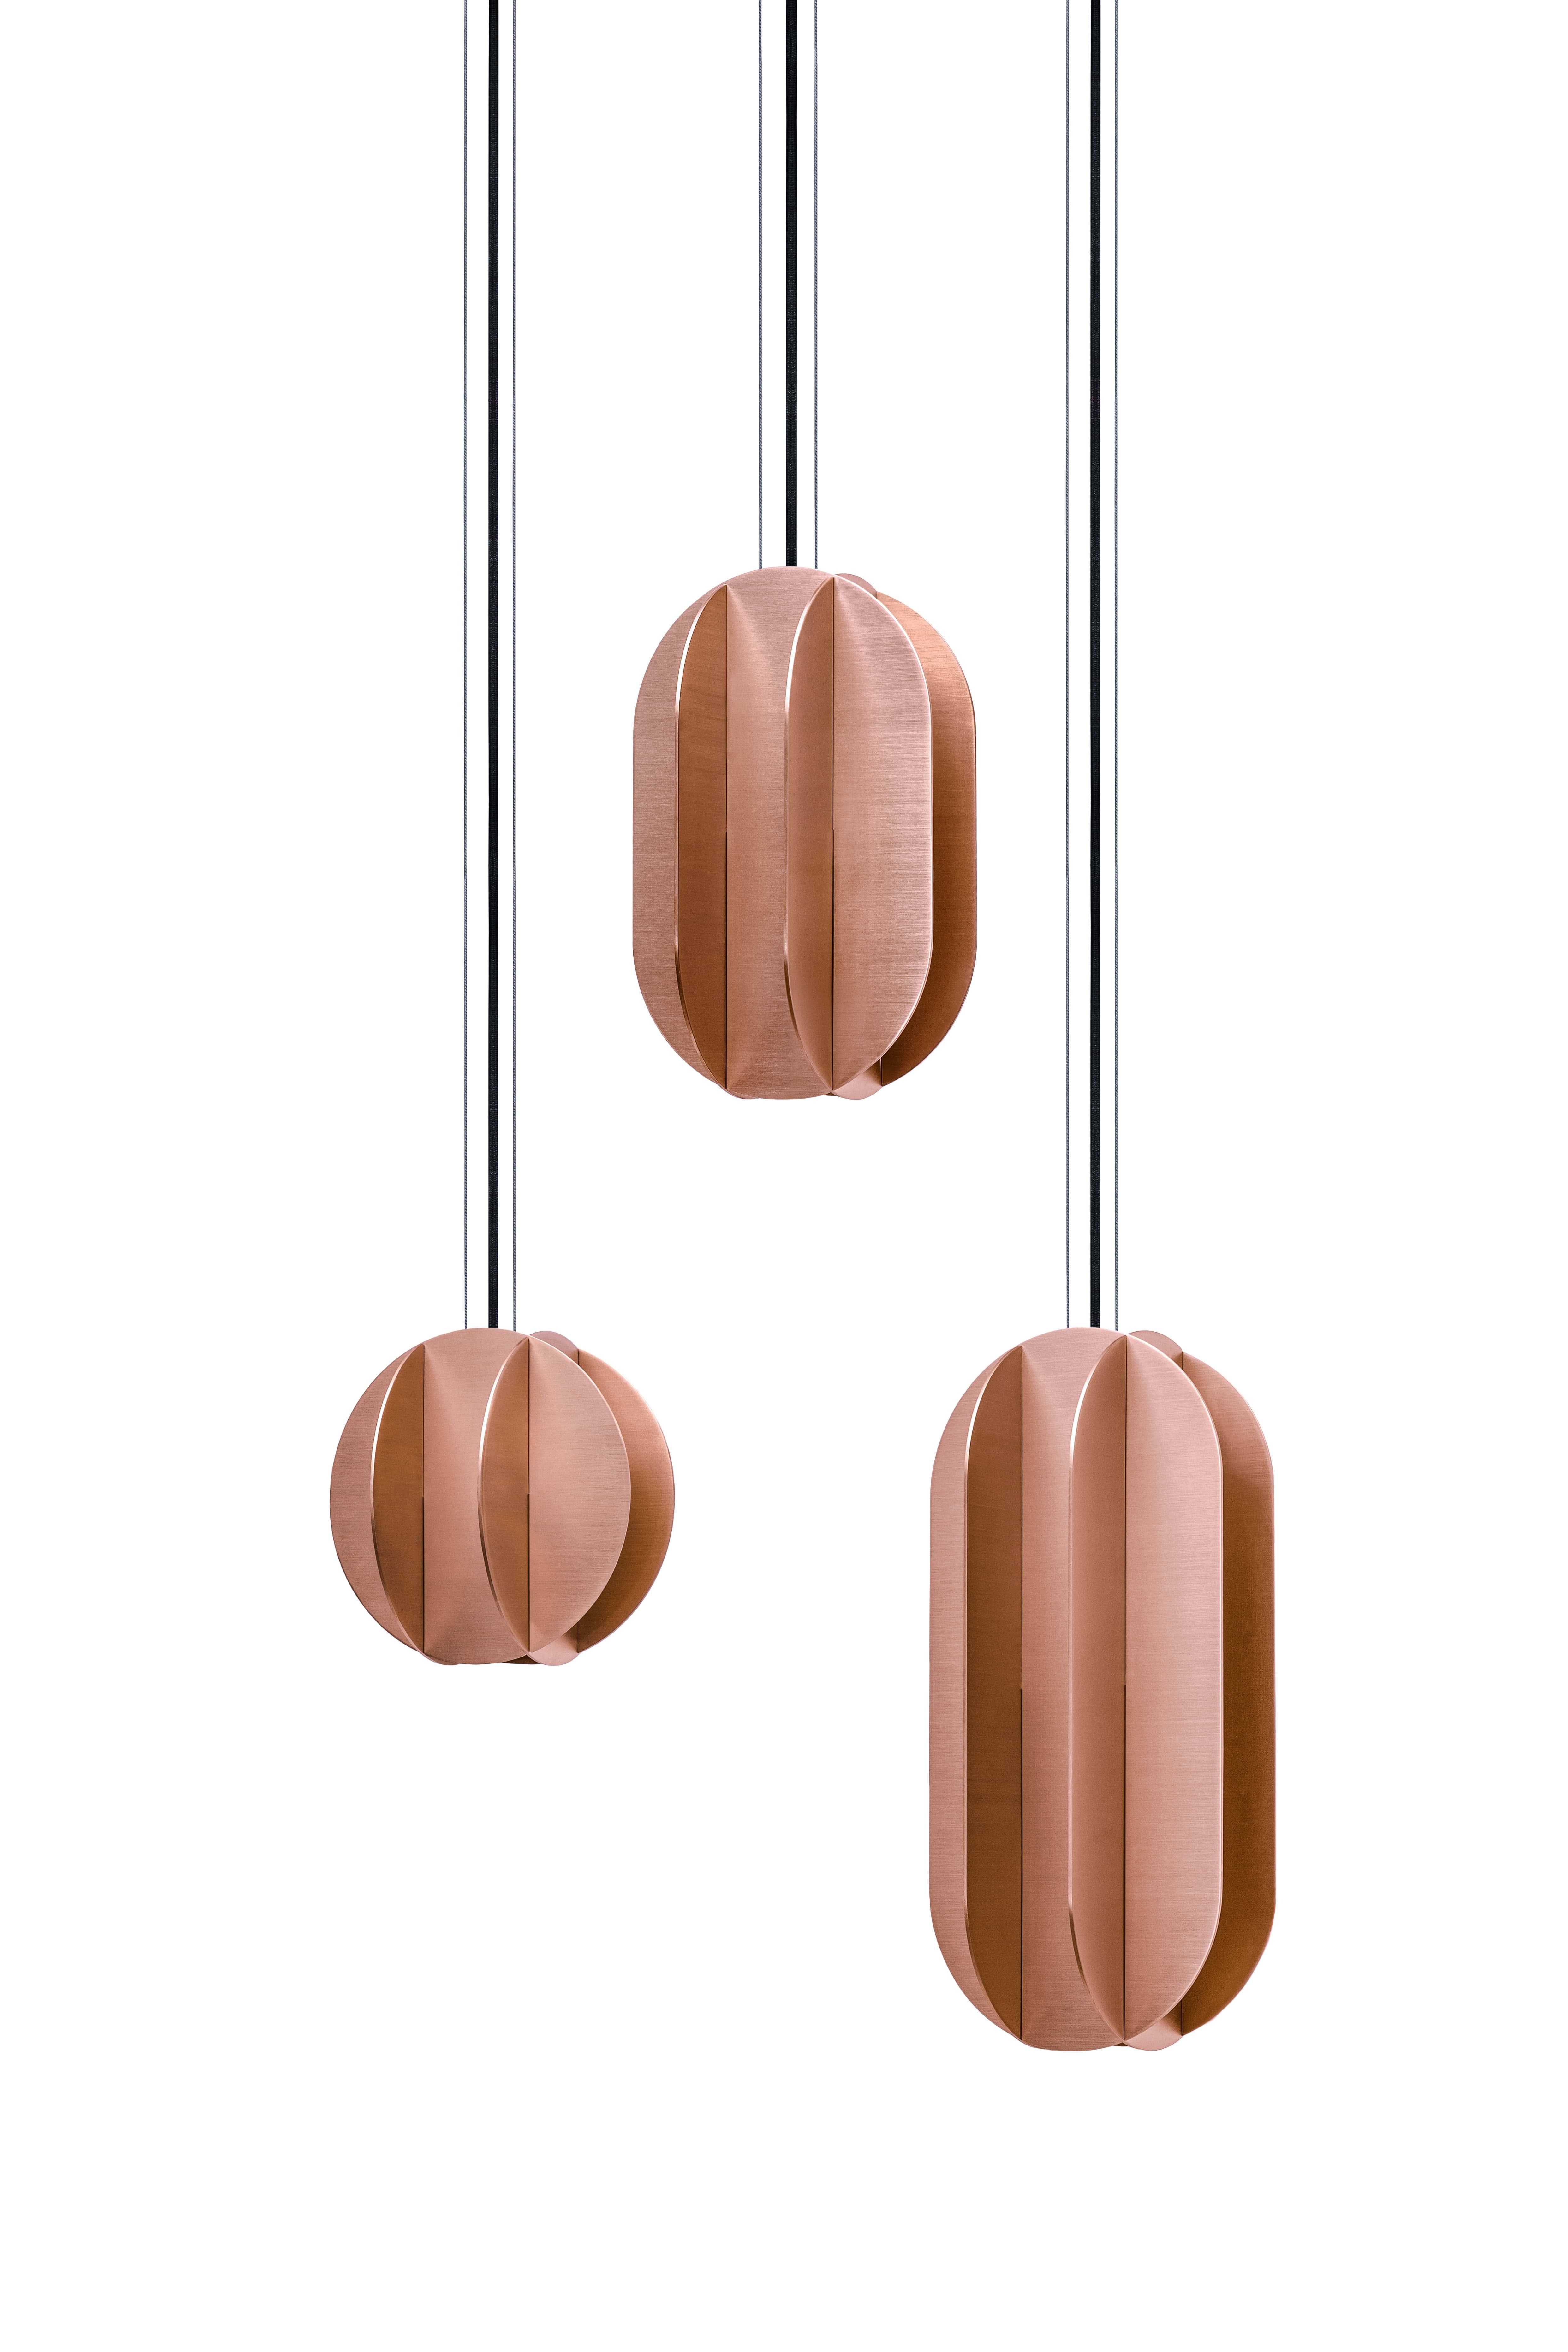 Contemporary Pendant Lamp EL Lamp small CS3 by NOOM in Stainless Steel 8